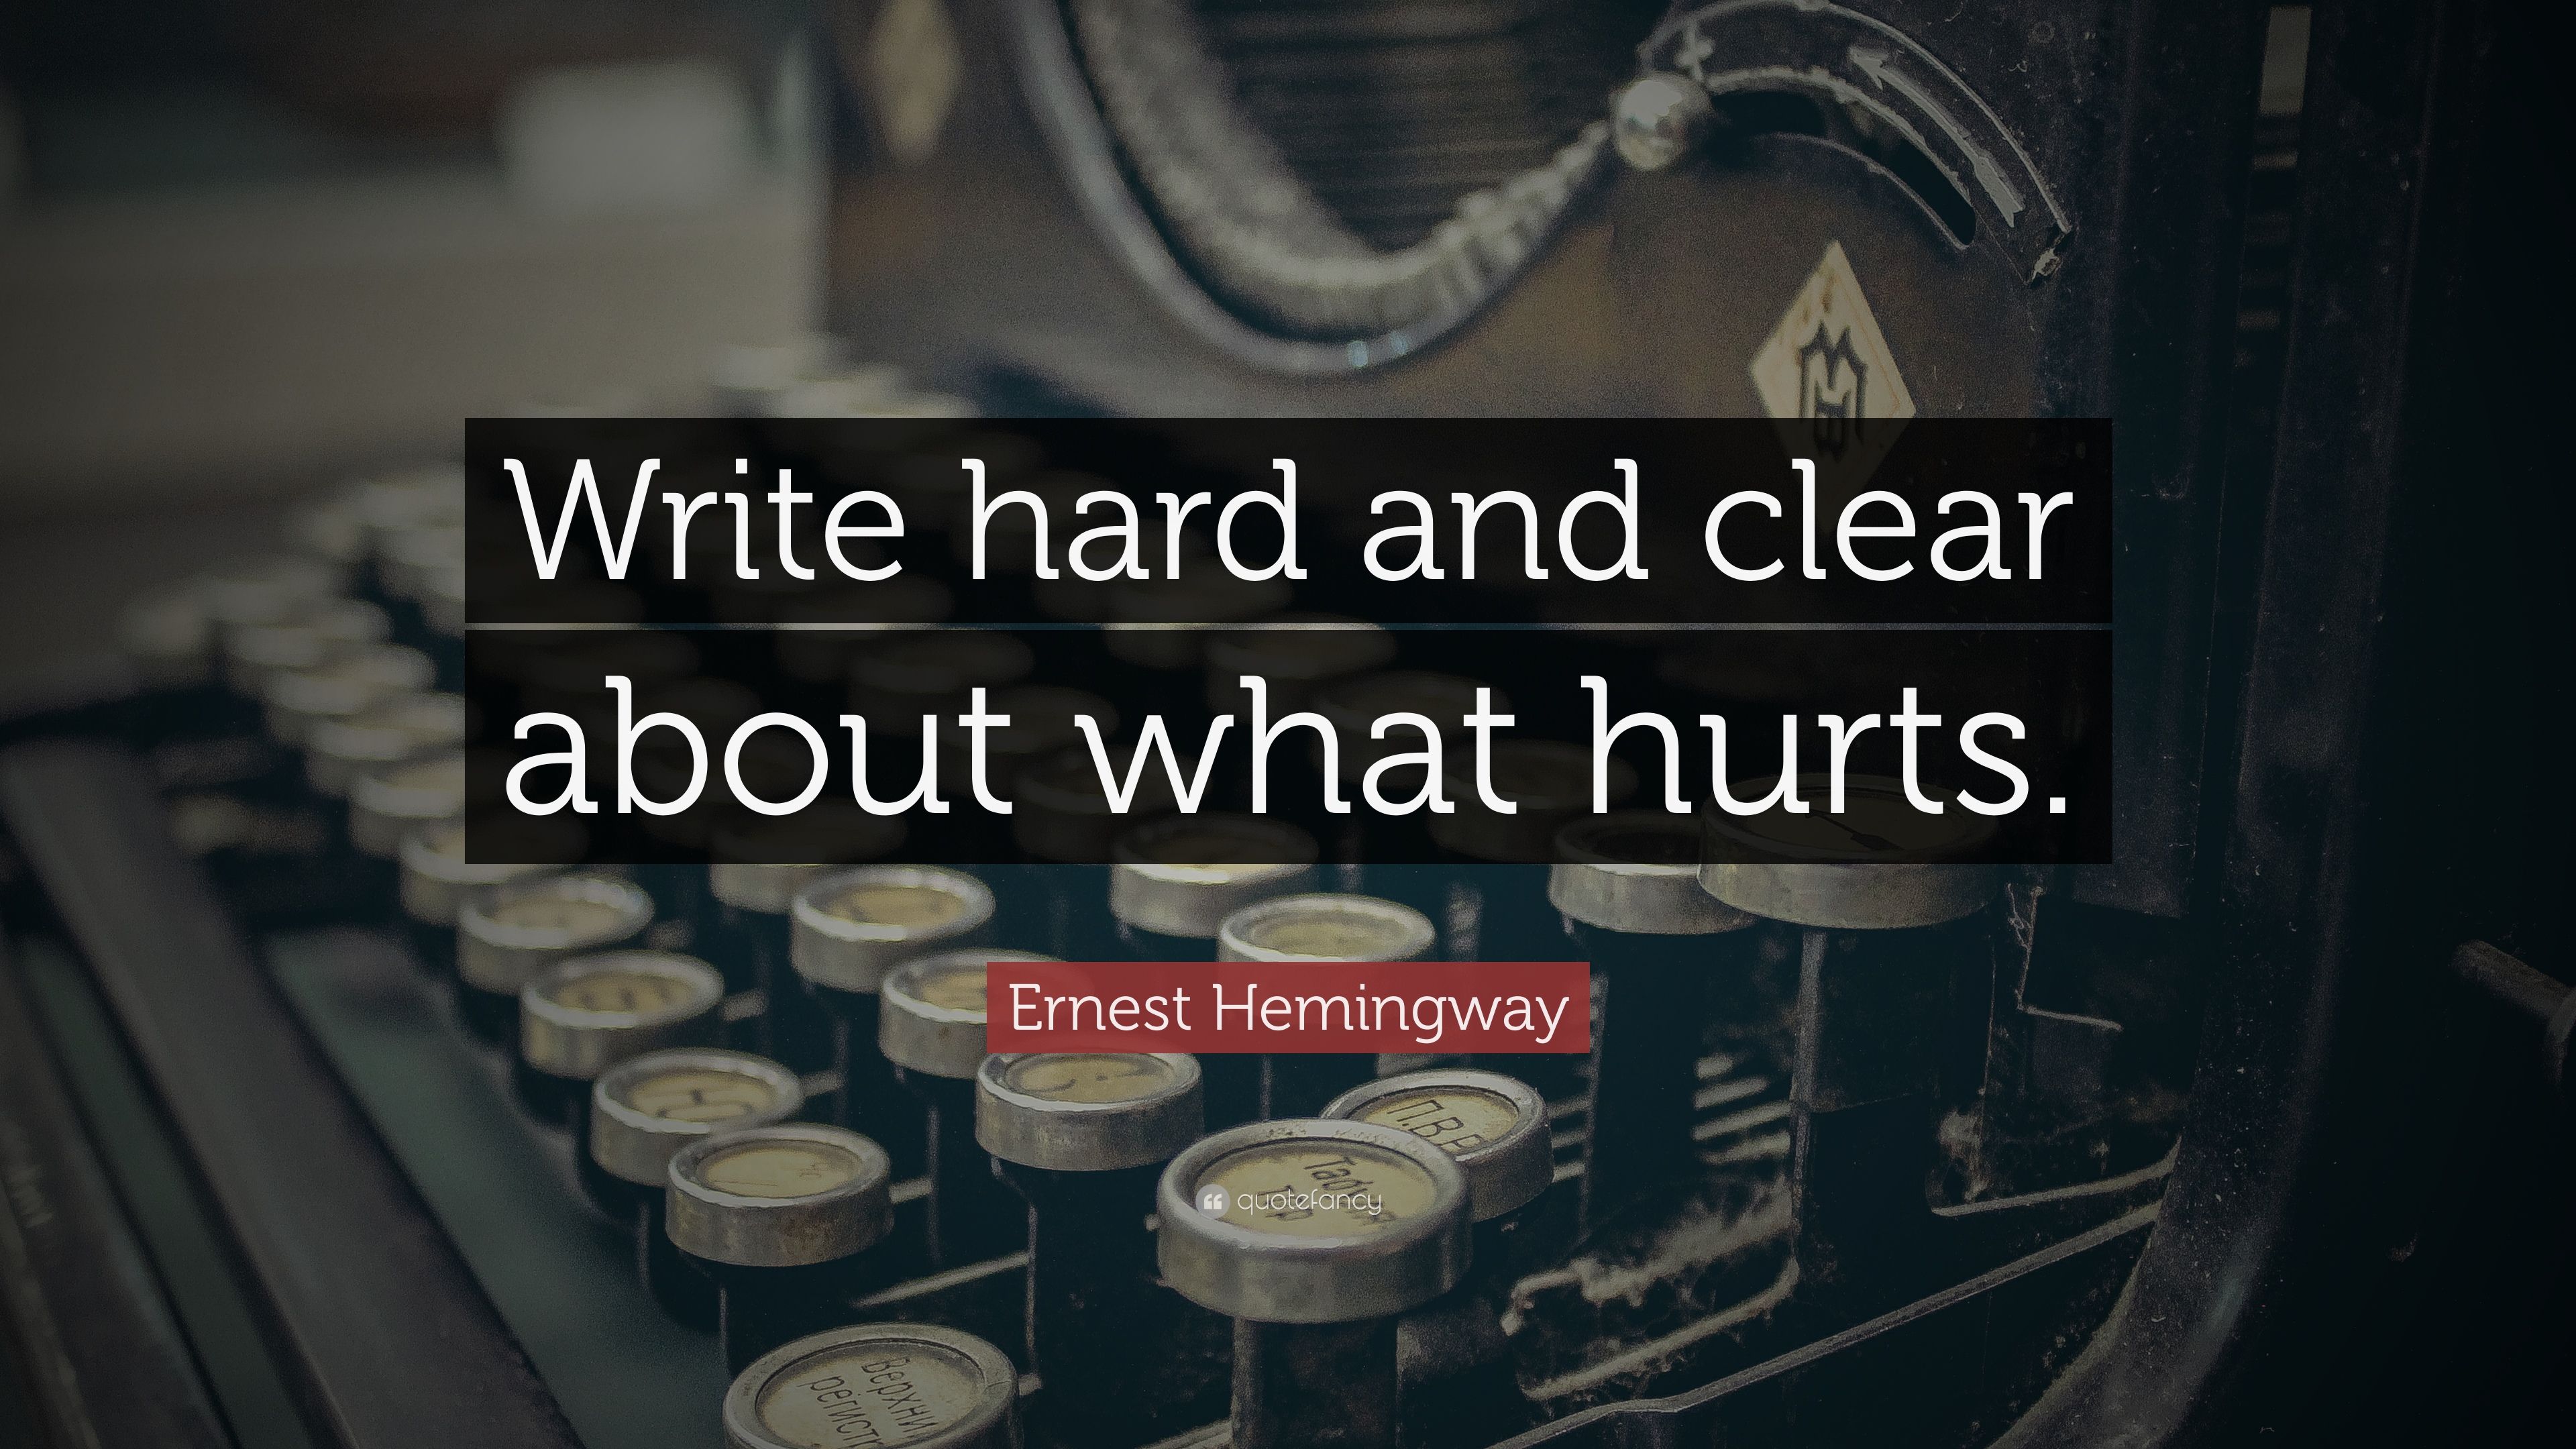 Ernest Hemingway Quote: “Write hard and clear about what hurts